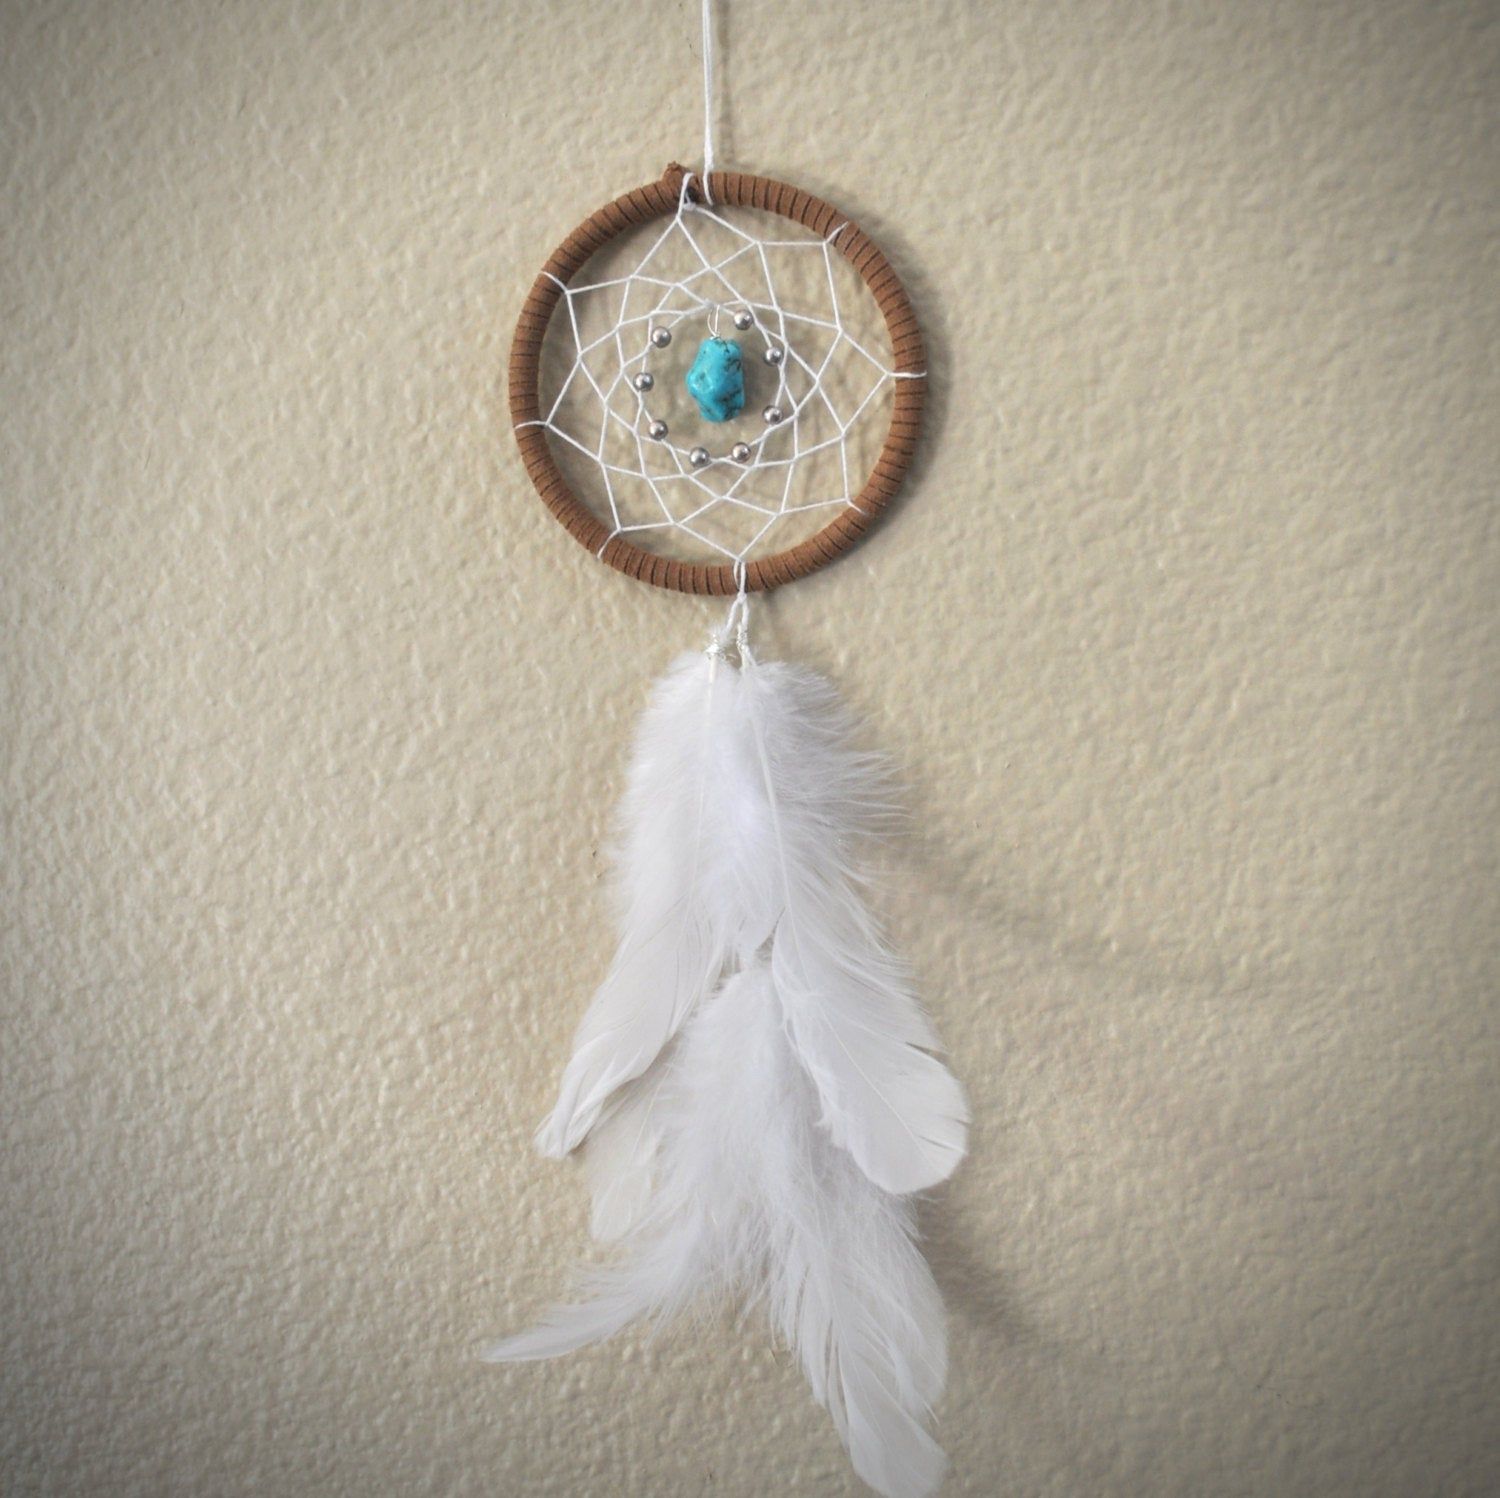 Dream Catcher for Car Mirror- Brown, White, and Turquoise Stone - Dream Catcher for Car Mirror- Brown, White, and Turquoise Stone -   19 diy Dream Catcher mini ideas